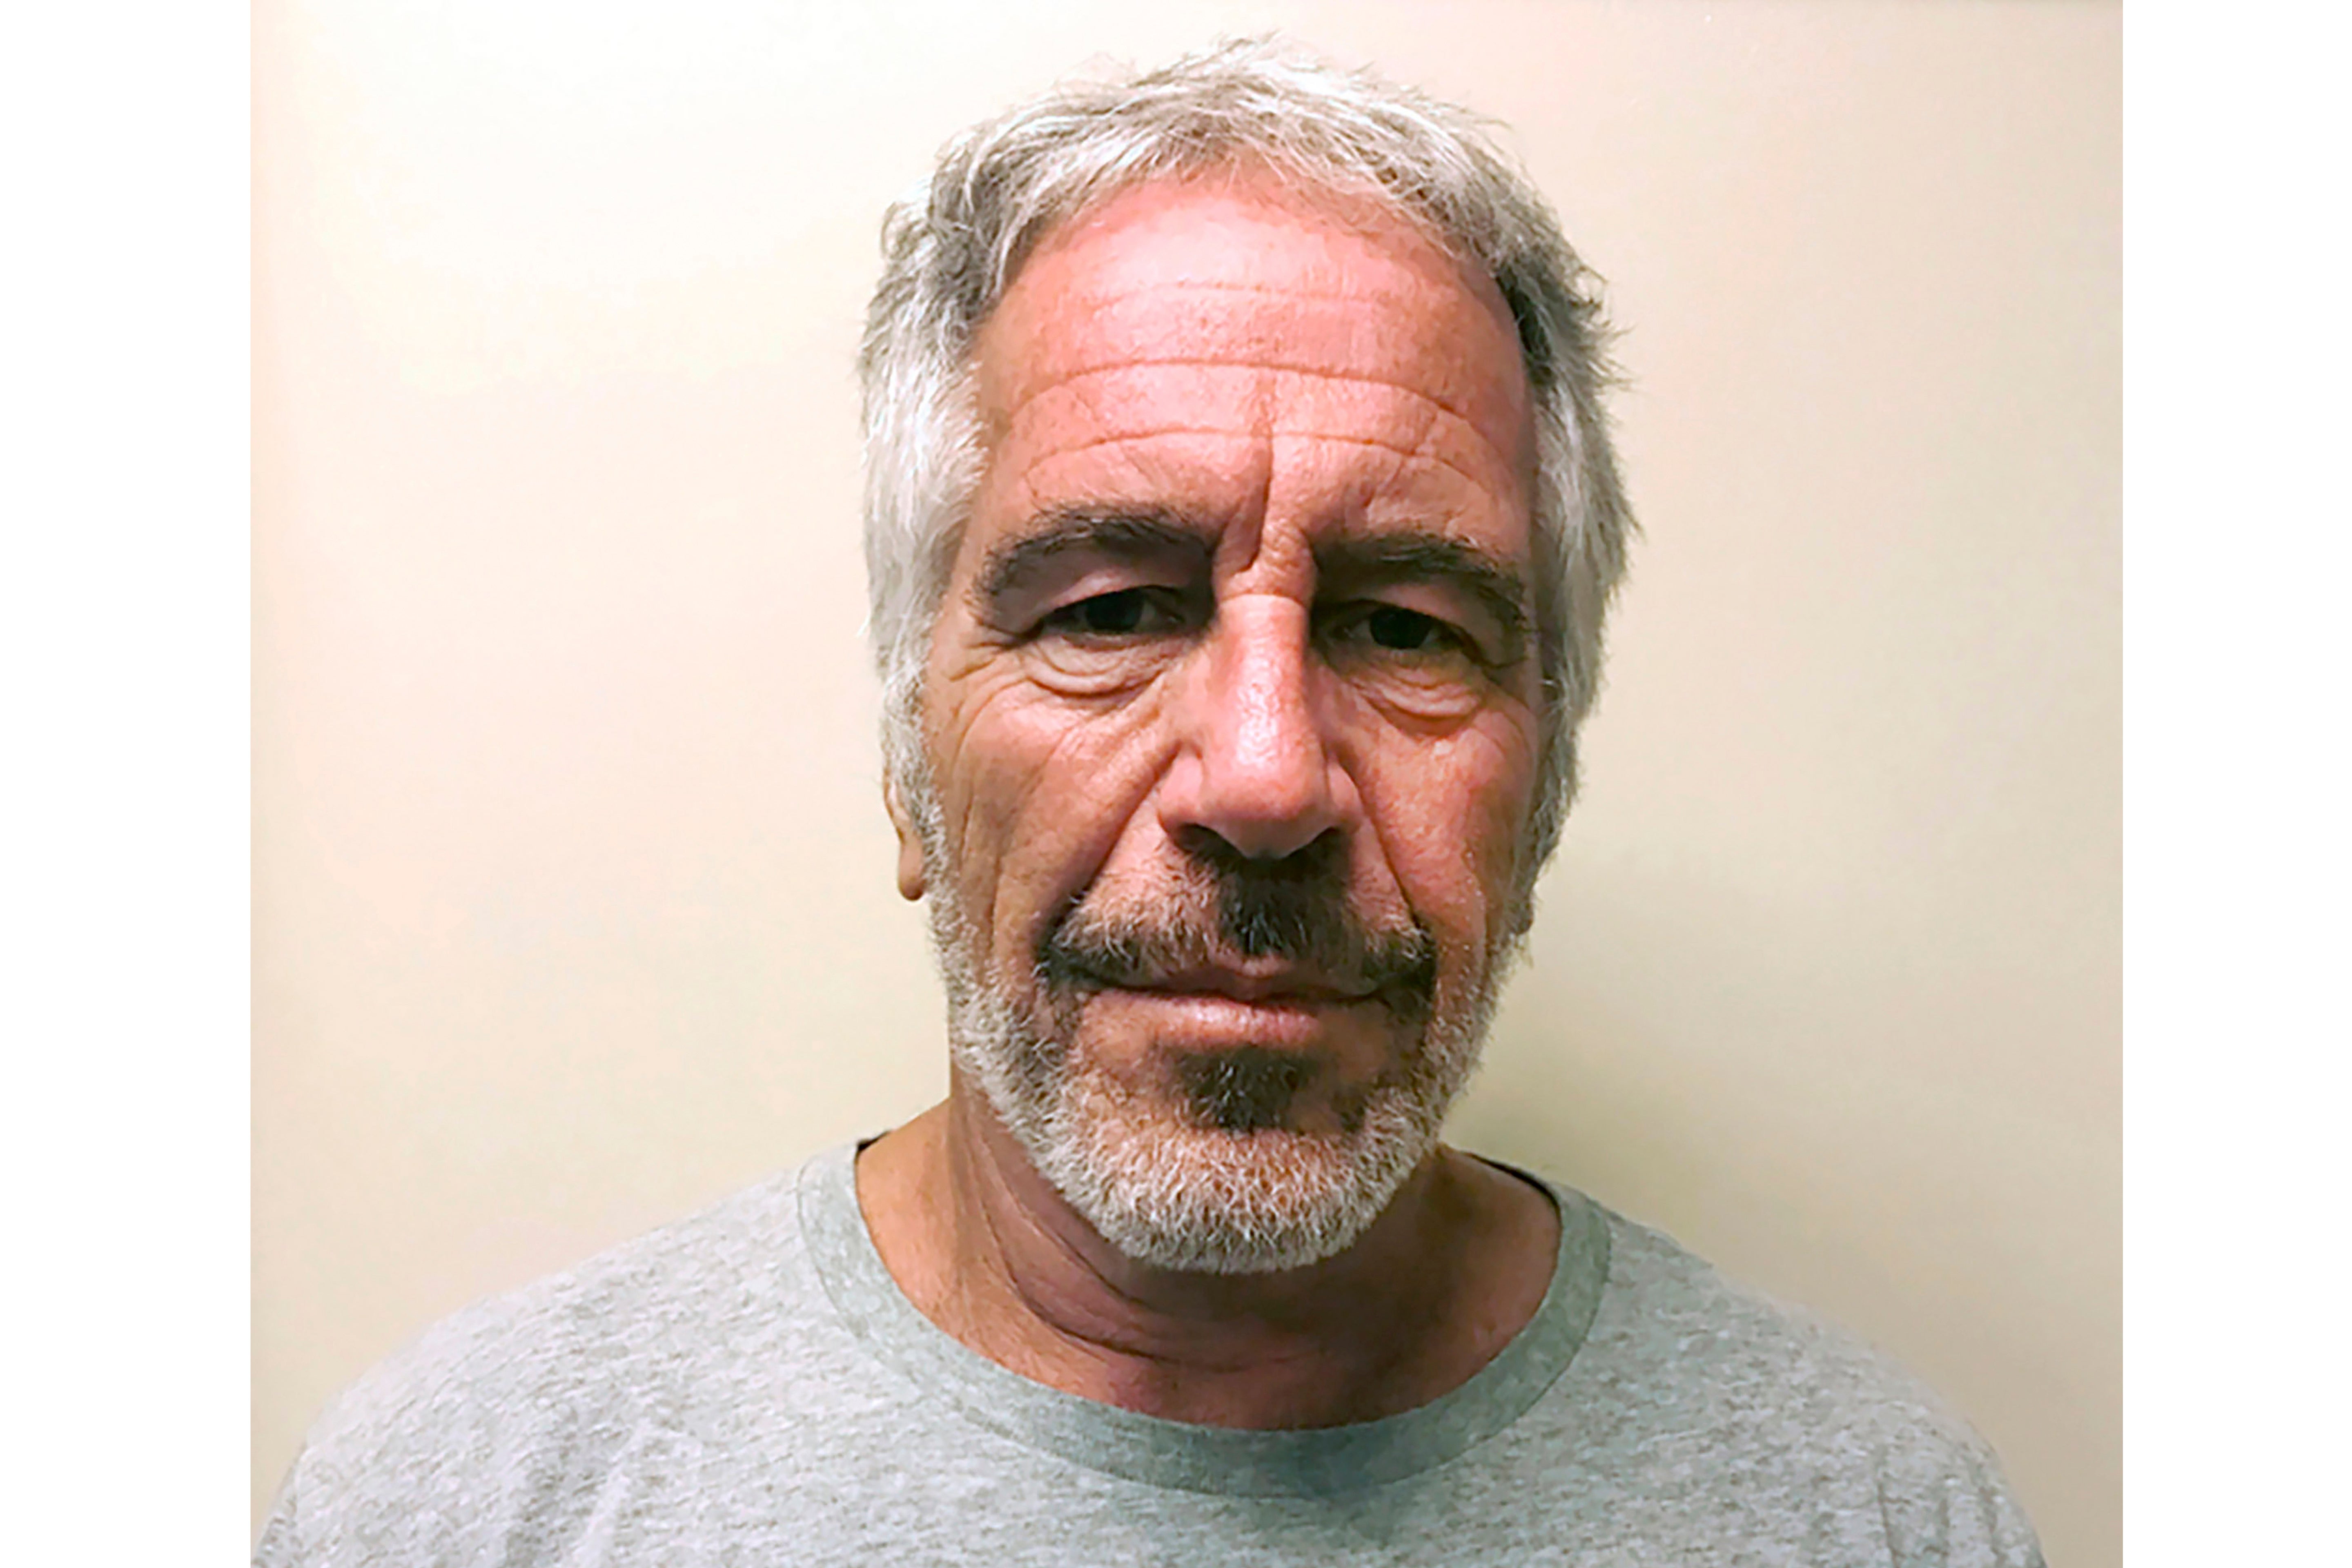 The notorious ‘Little Black Book’ of contacts belonging to Jeffrey Epstein, containing information of his associates, has gone up for sale